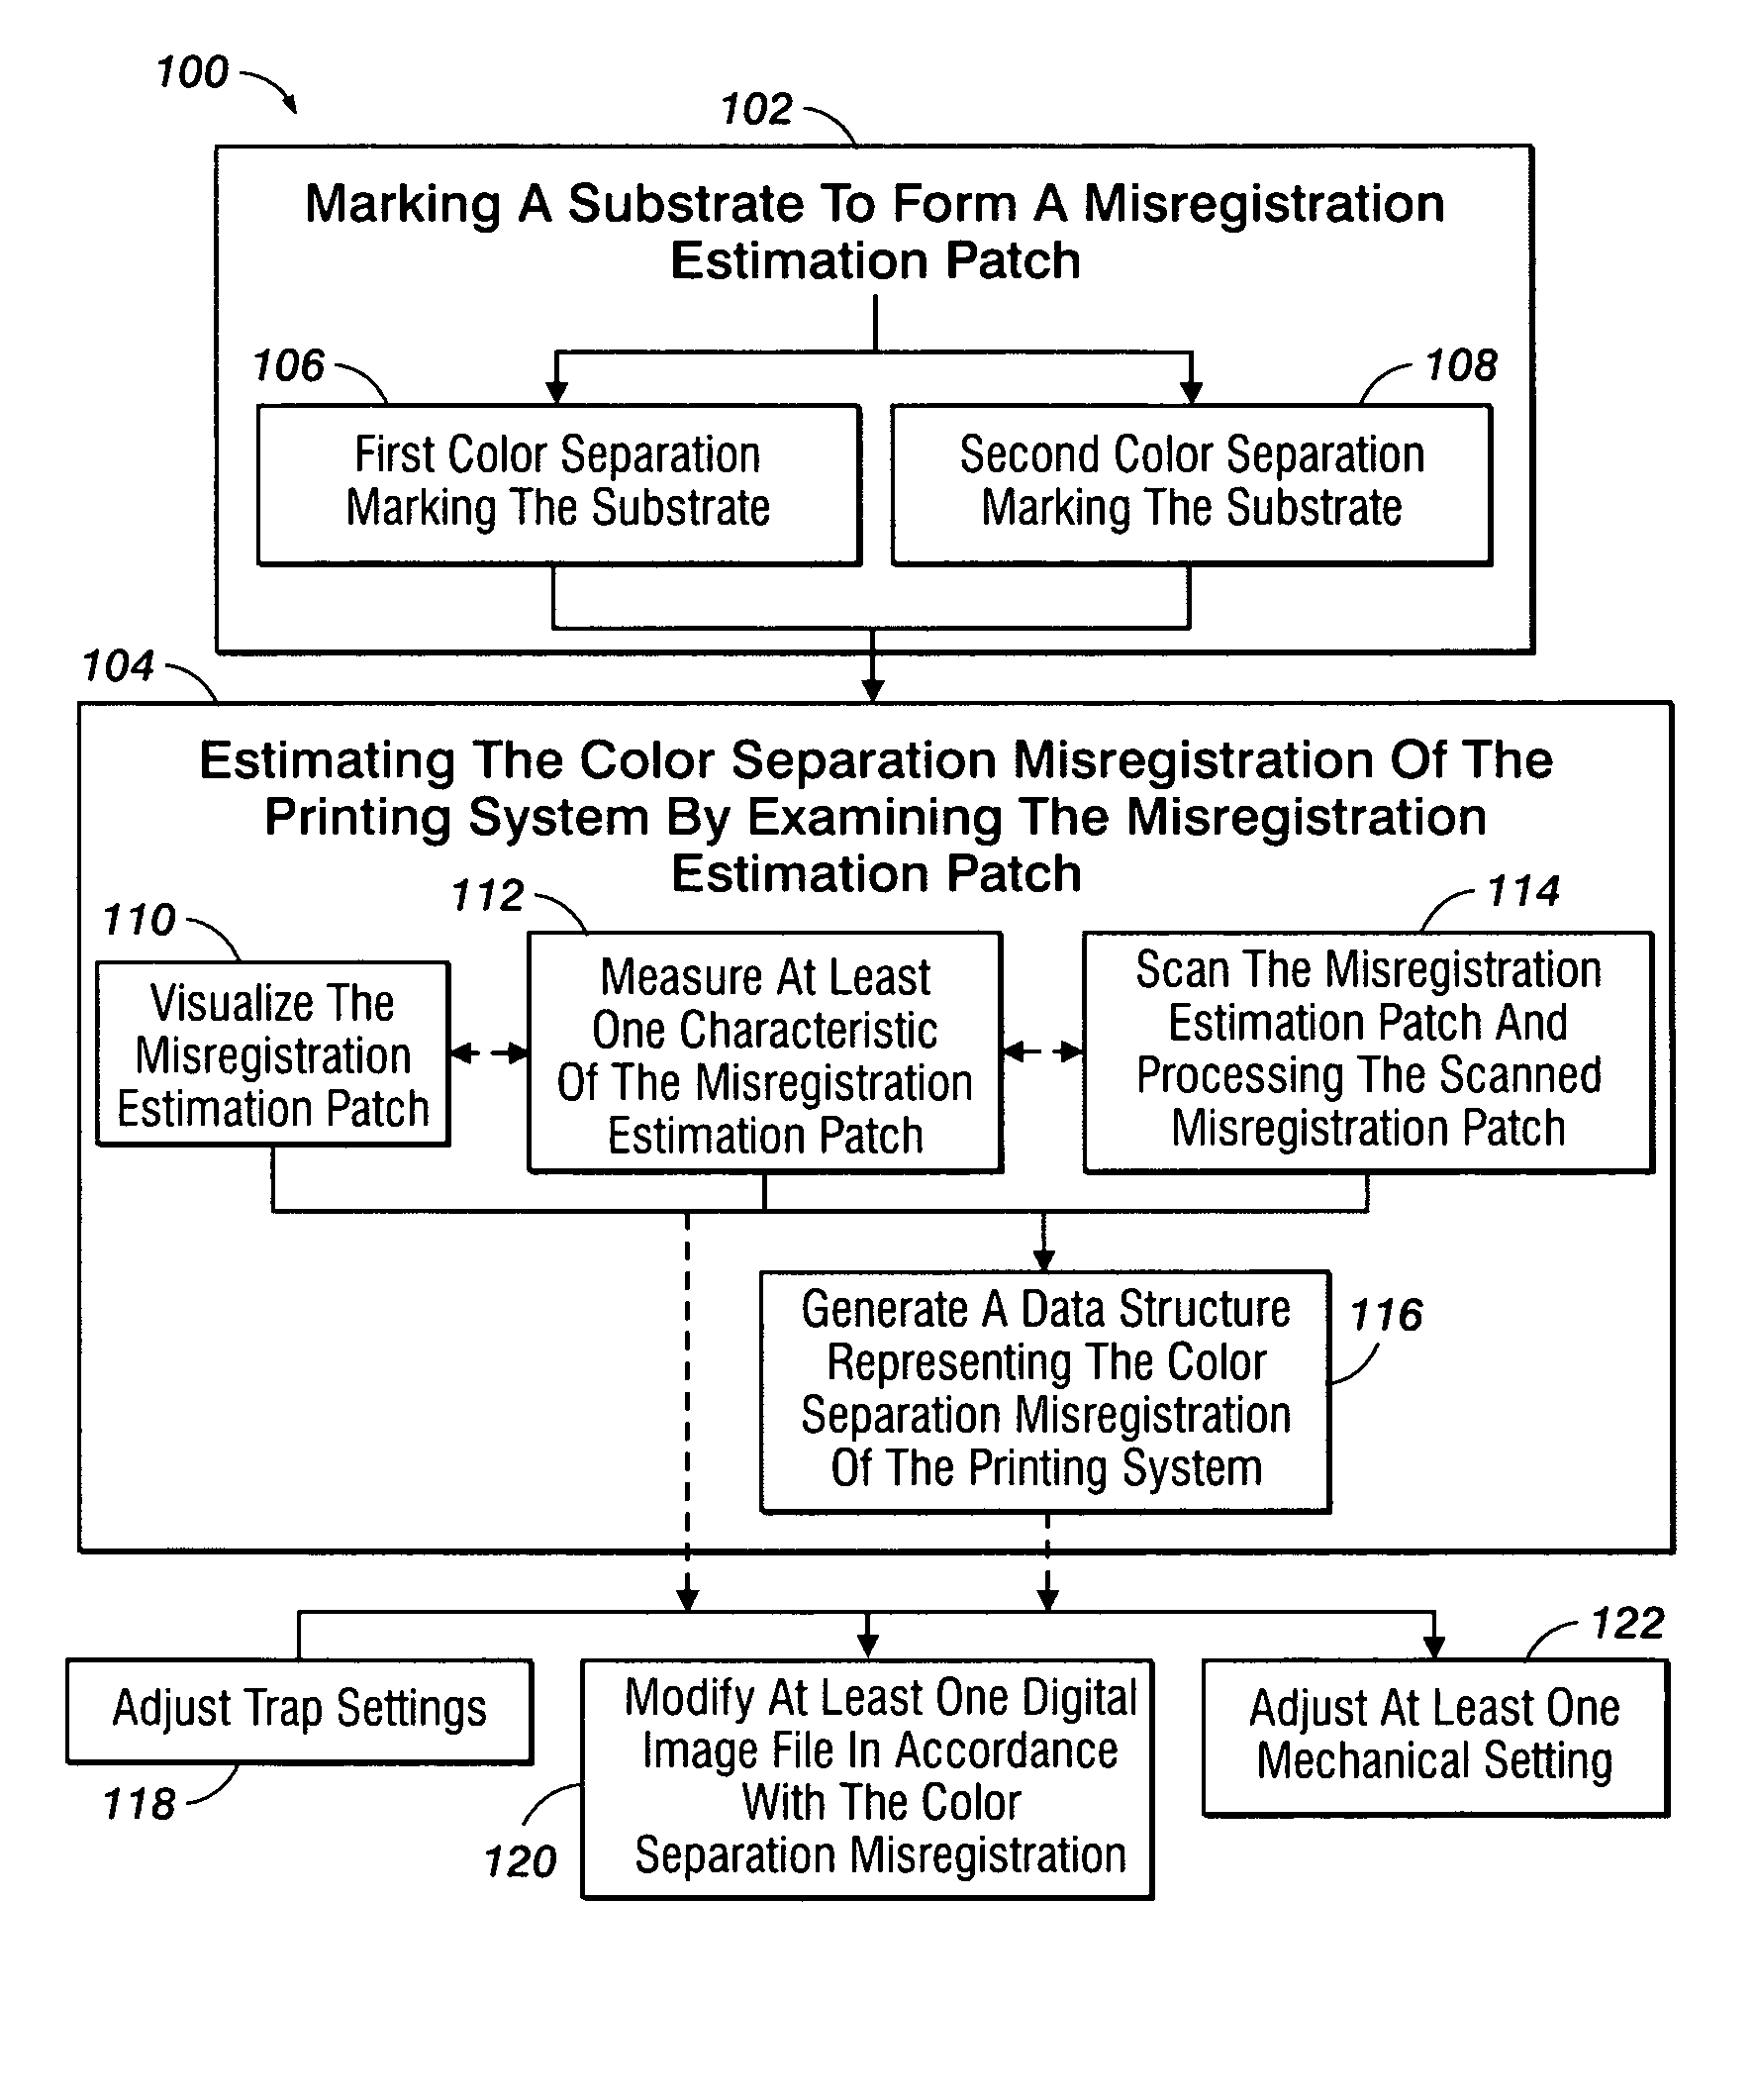 System and method for estimating color separation misregistration utilizing frequency-shifted halftone patterns that form a moiré pattern